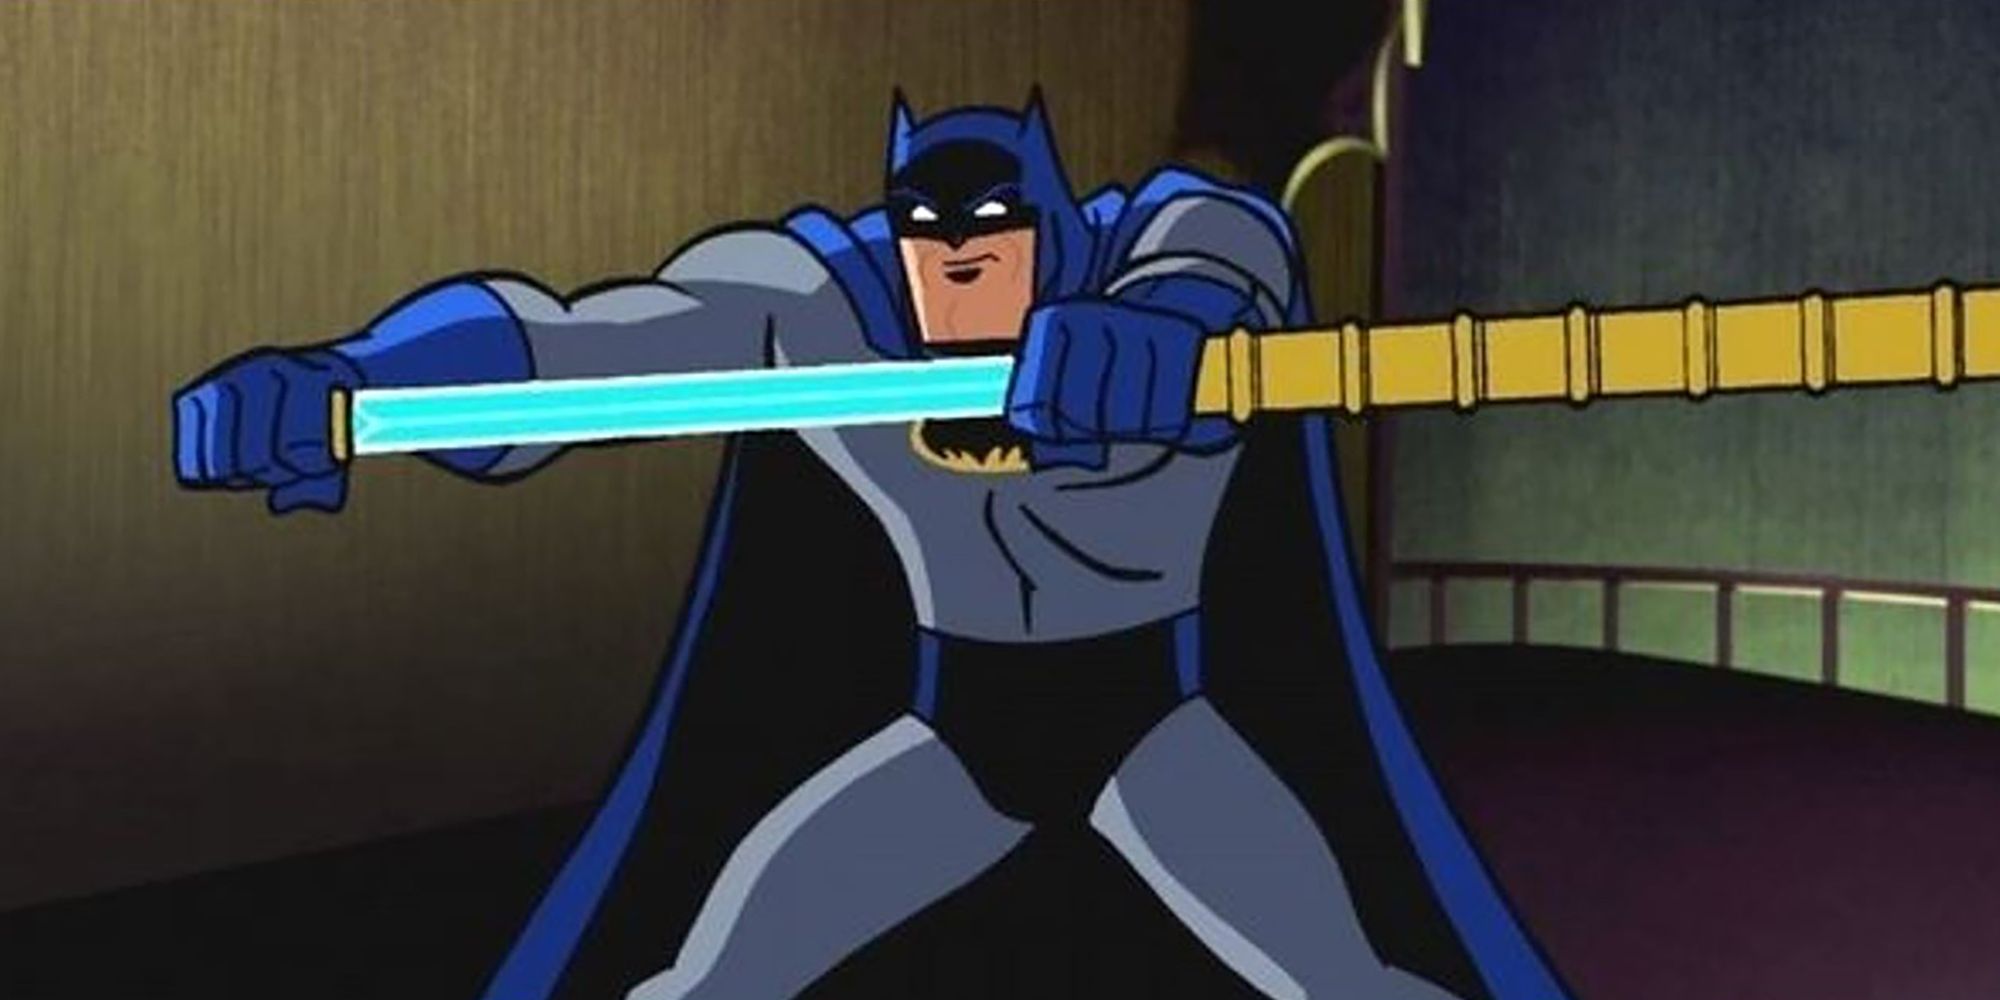 Batman With His "Collapsible Sword"